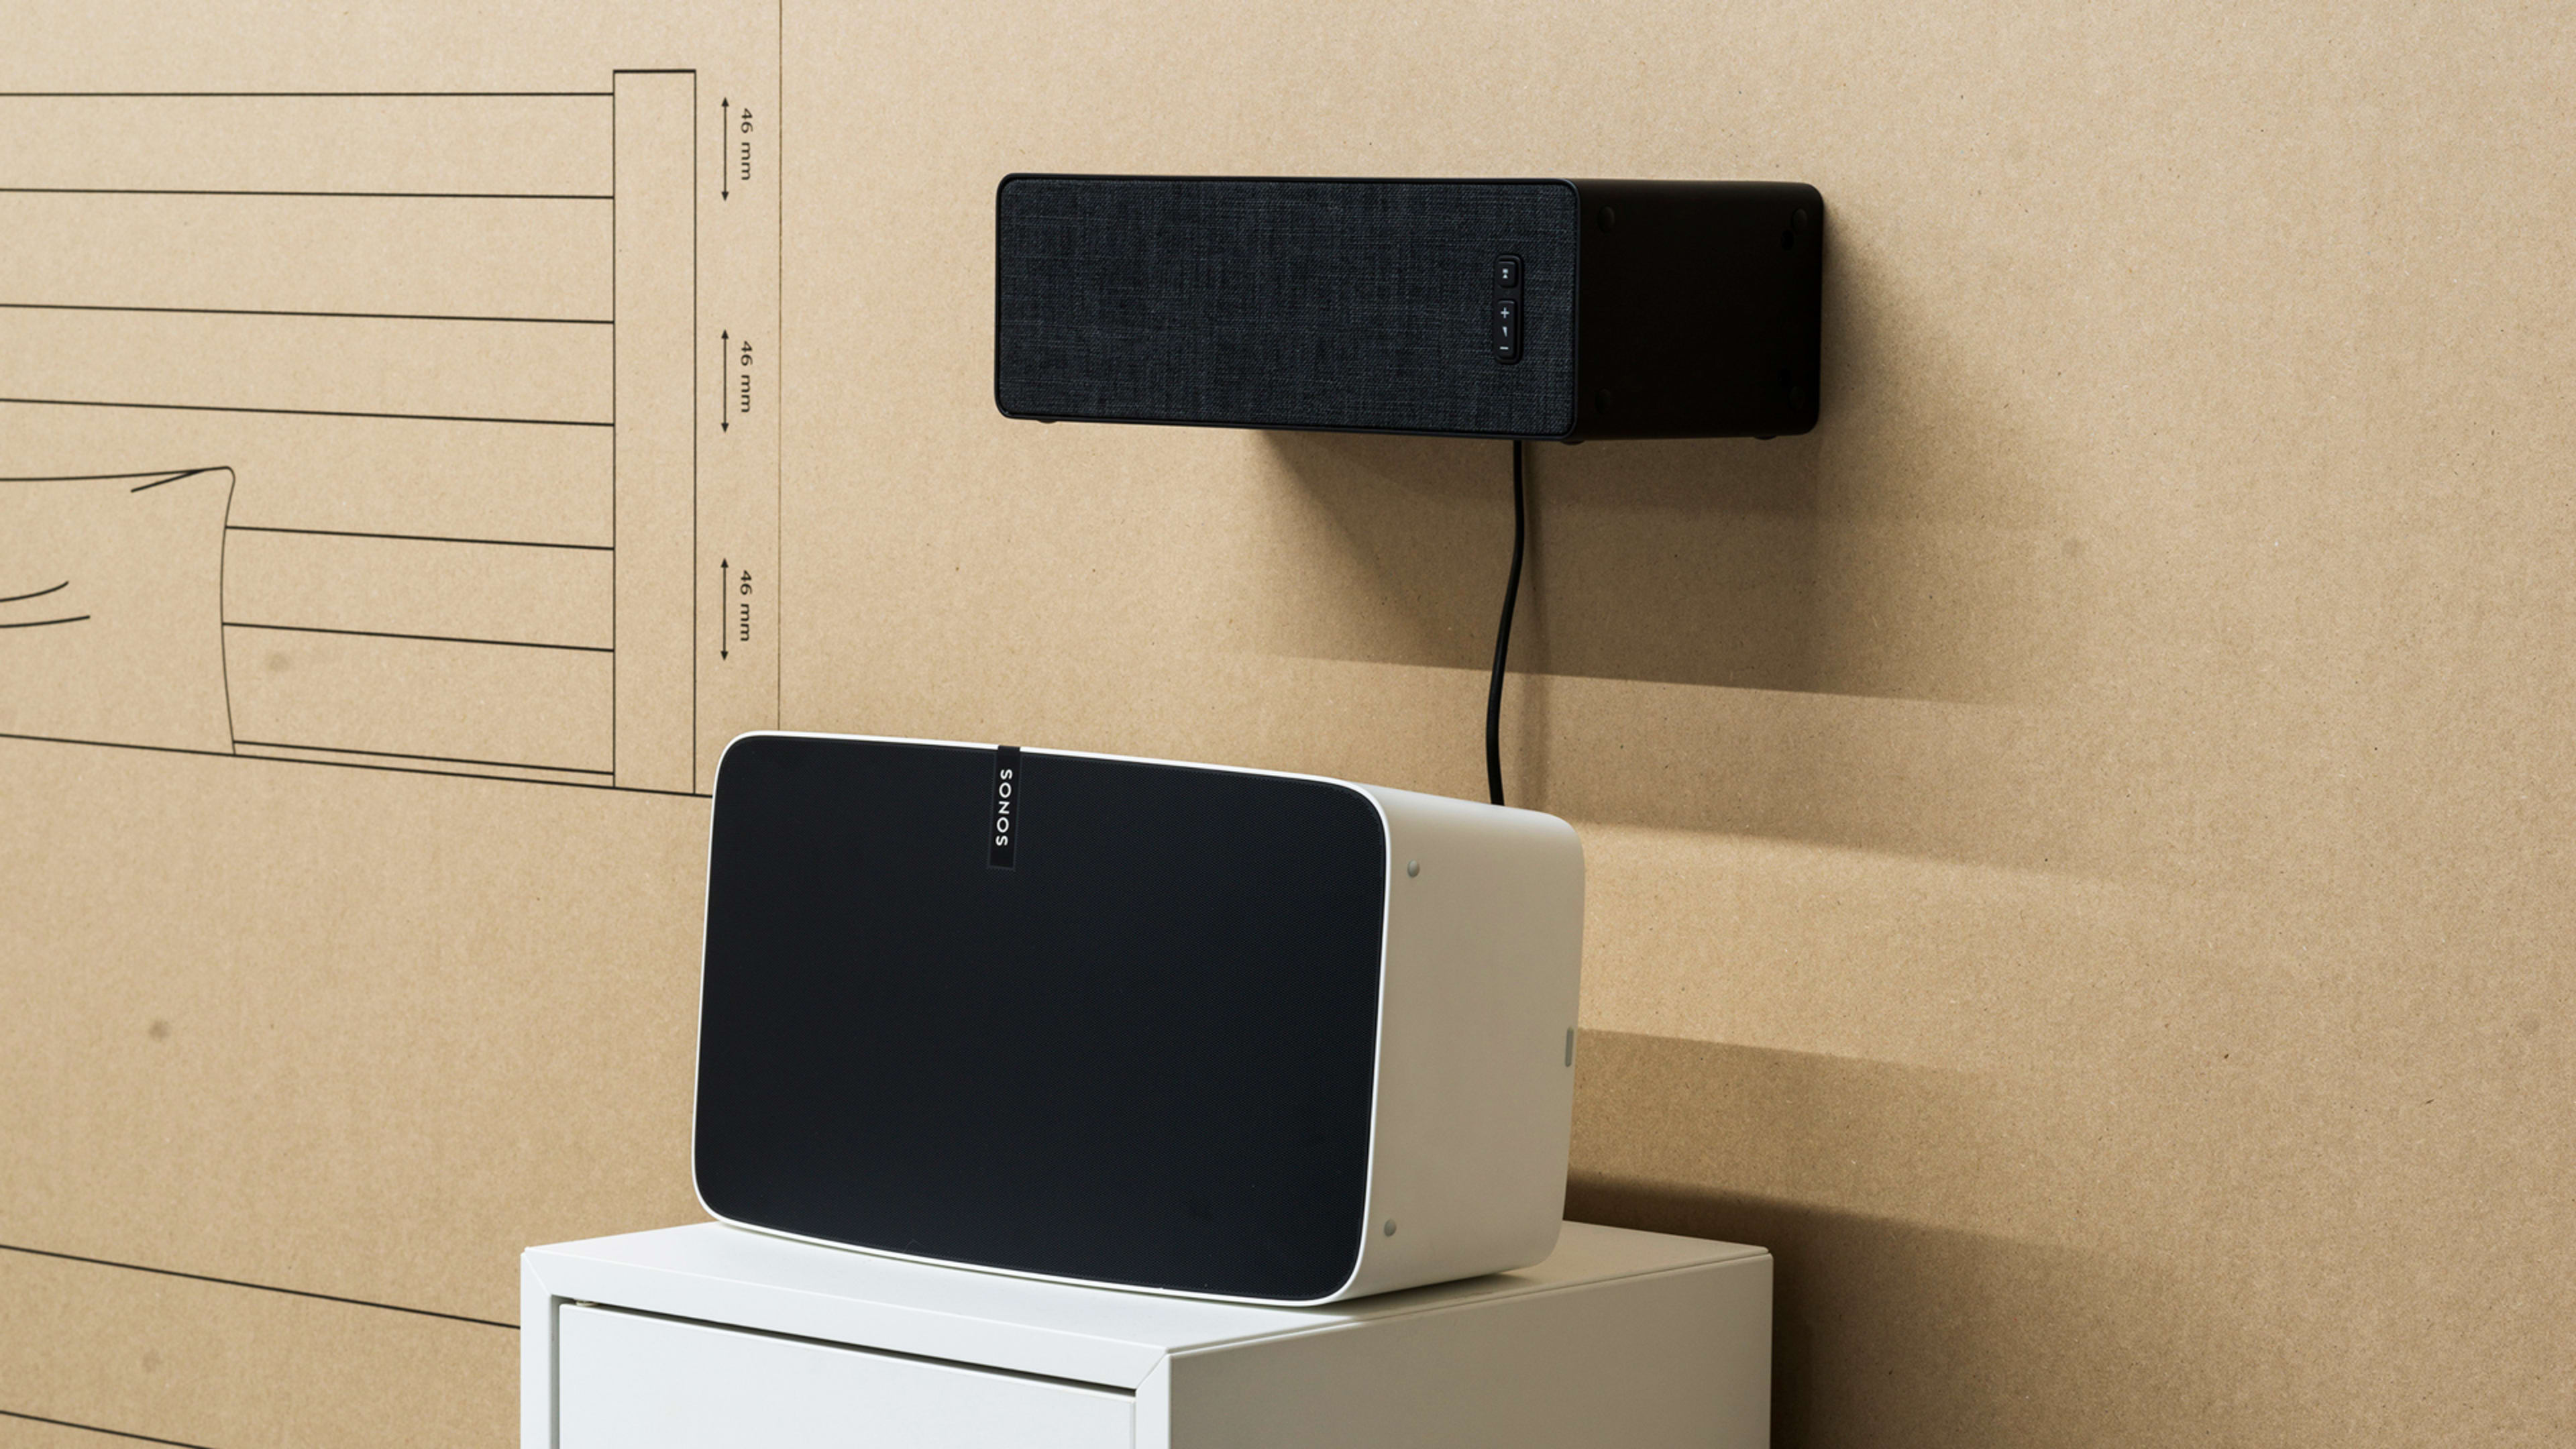 Ikea’s next big play for smart homes is here